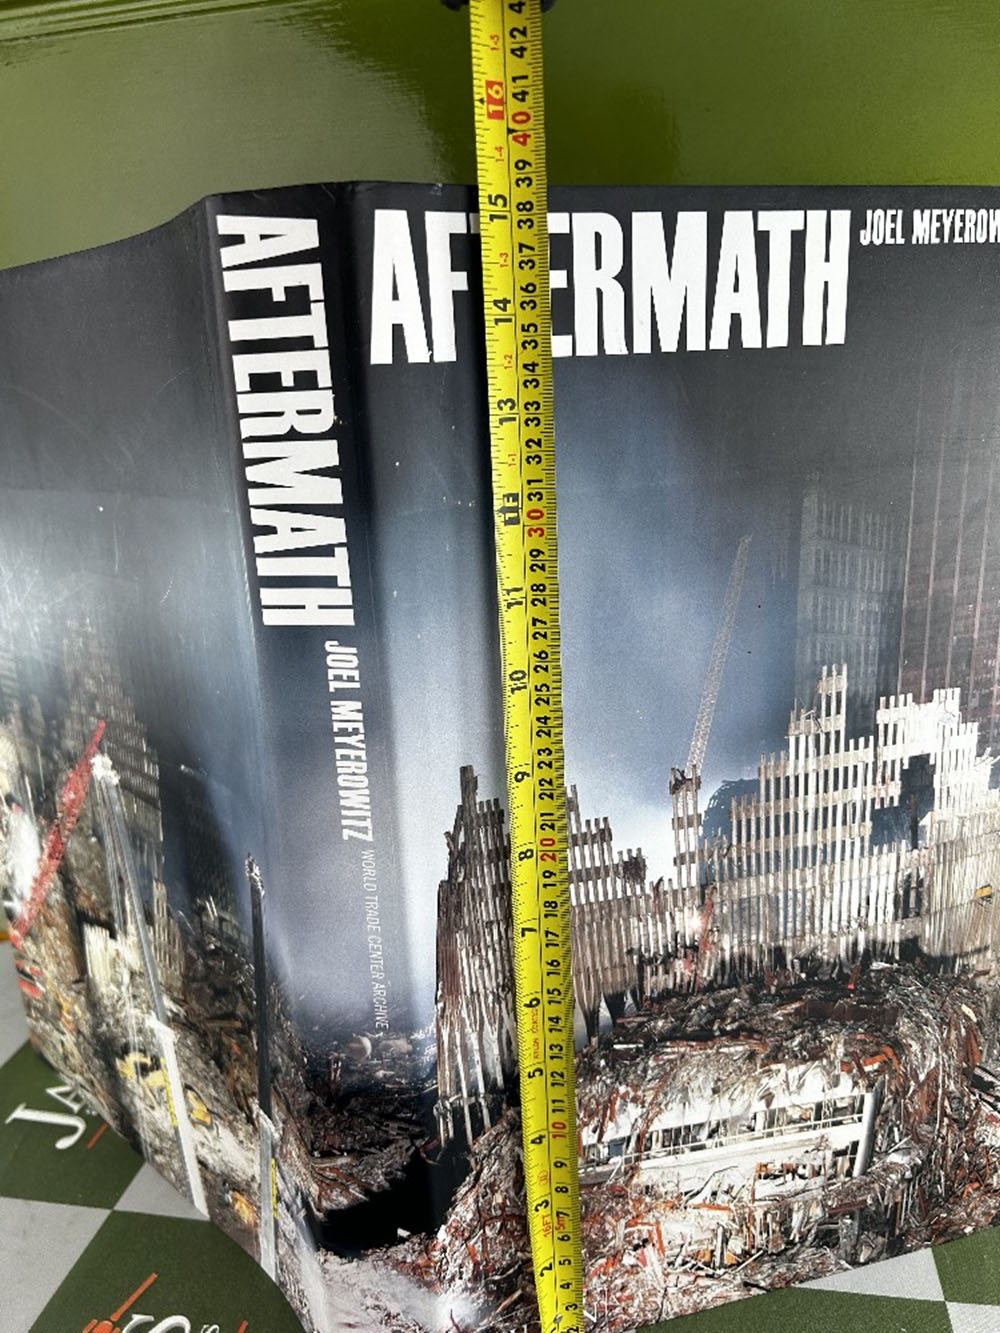 The Aftermath Twin Tower Large Hardback Pictorial Book - Image 9 of 10